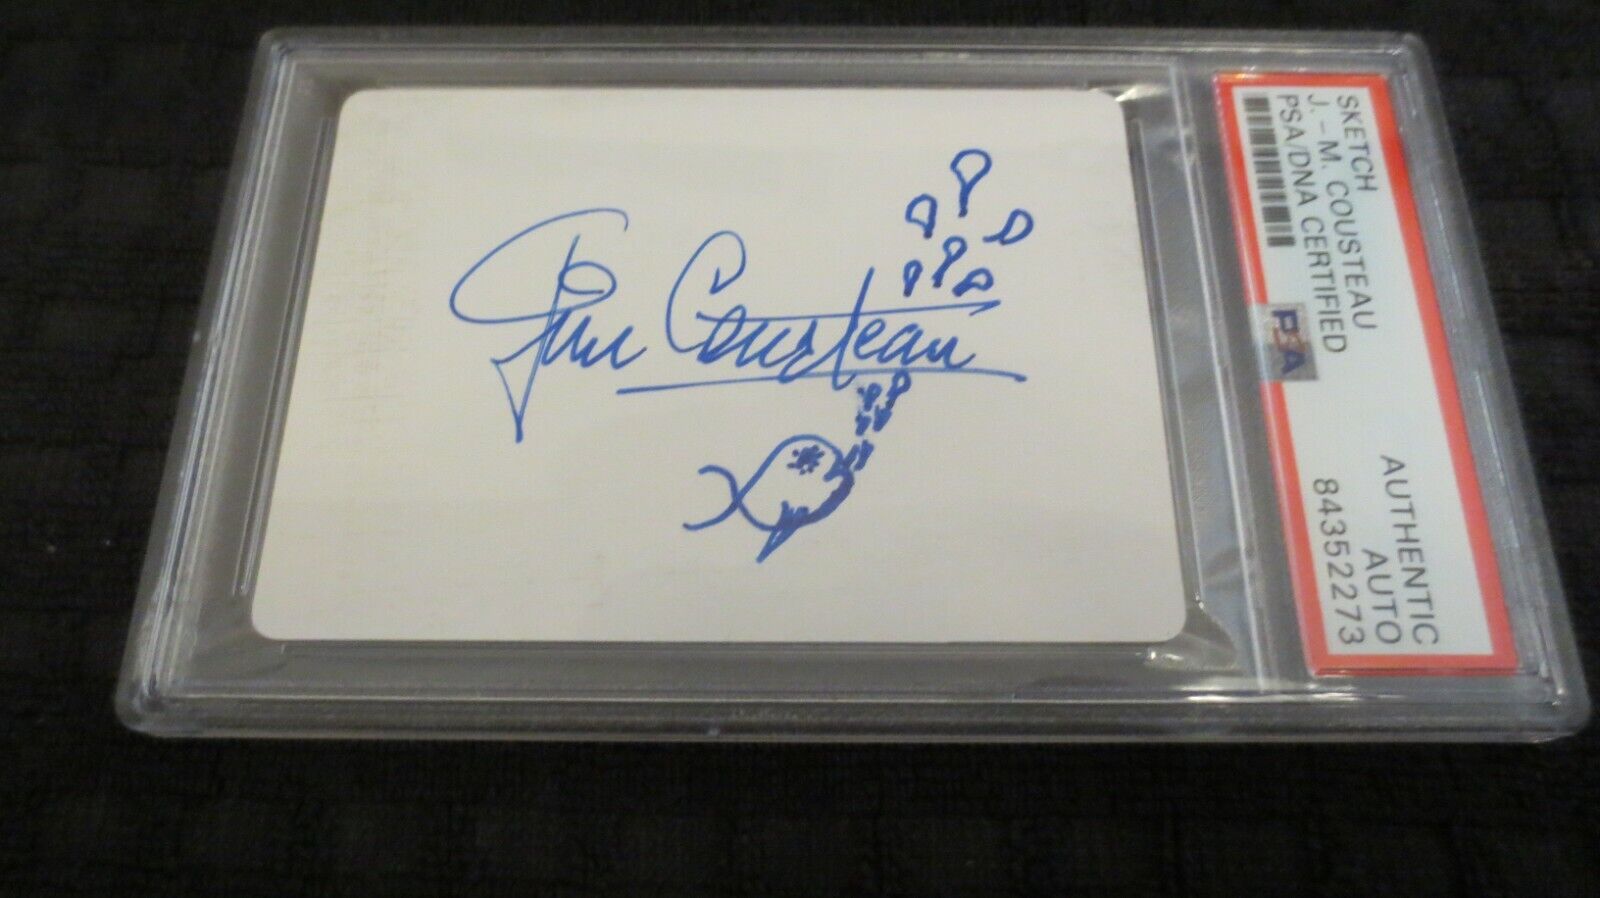 Jean-Michel Cousteau sketch signed autographed psa slabbed Ocean Futures Society